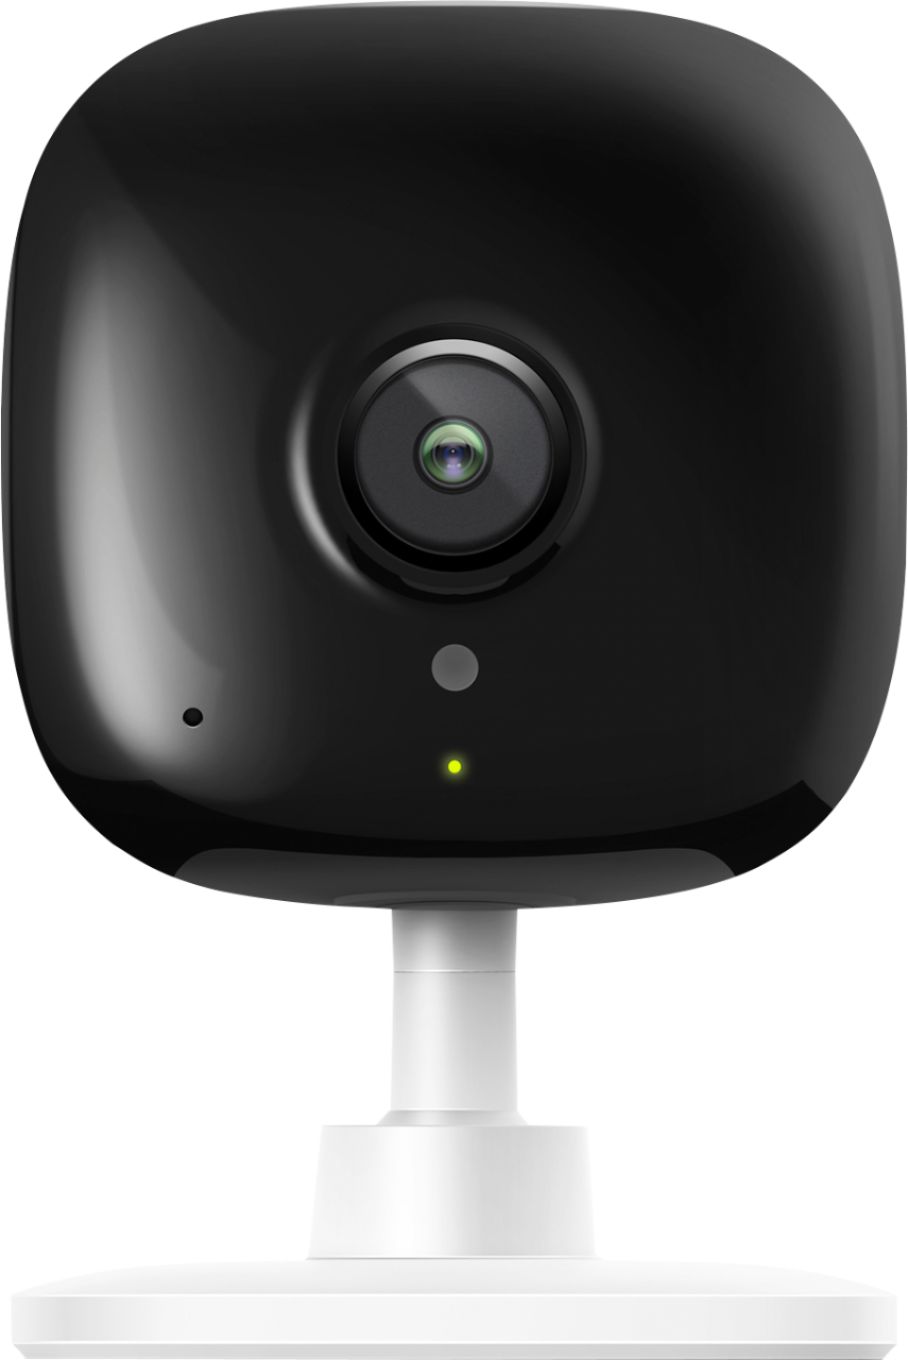 TP-Link - Kasa Spot Indoor 1080p Wi-Fi Wireless Security Camera - Black/White